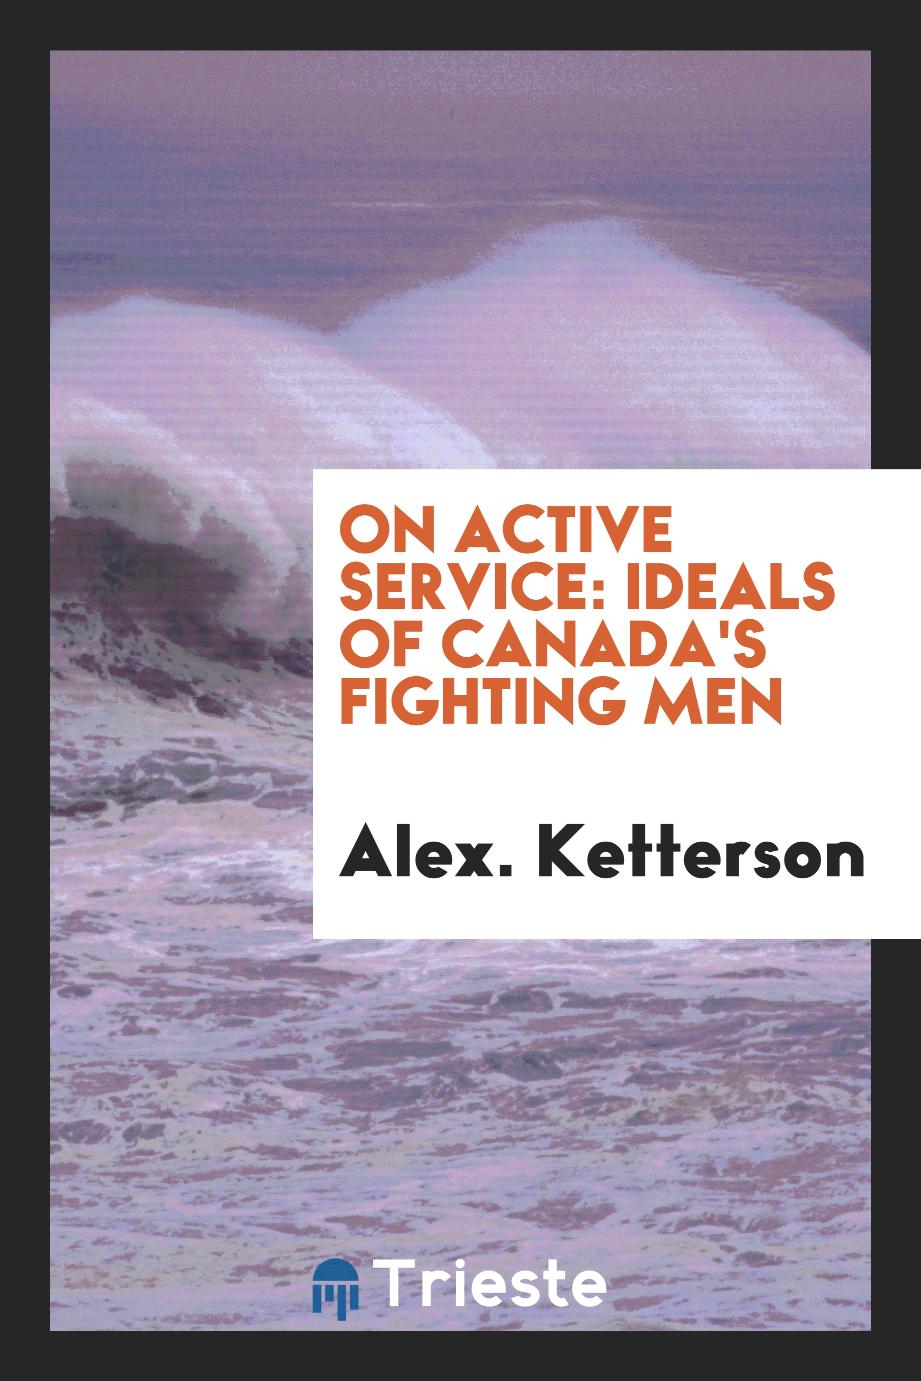 On active service: ideals of Canada's fighting men